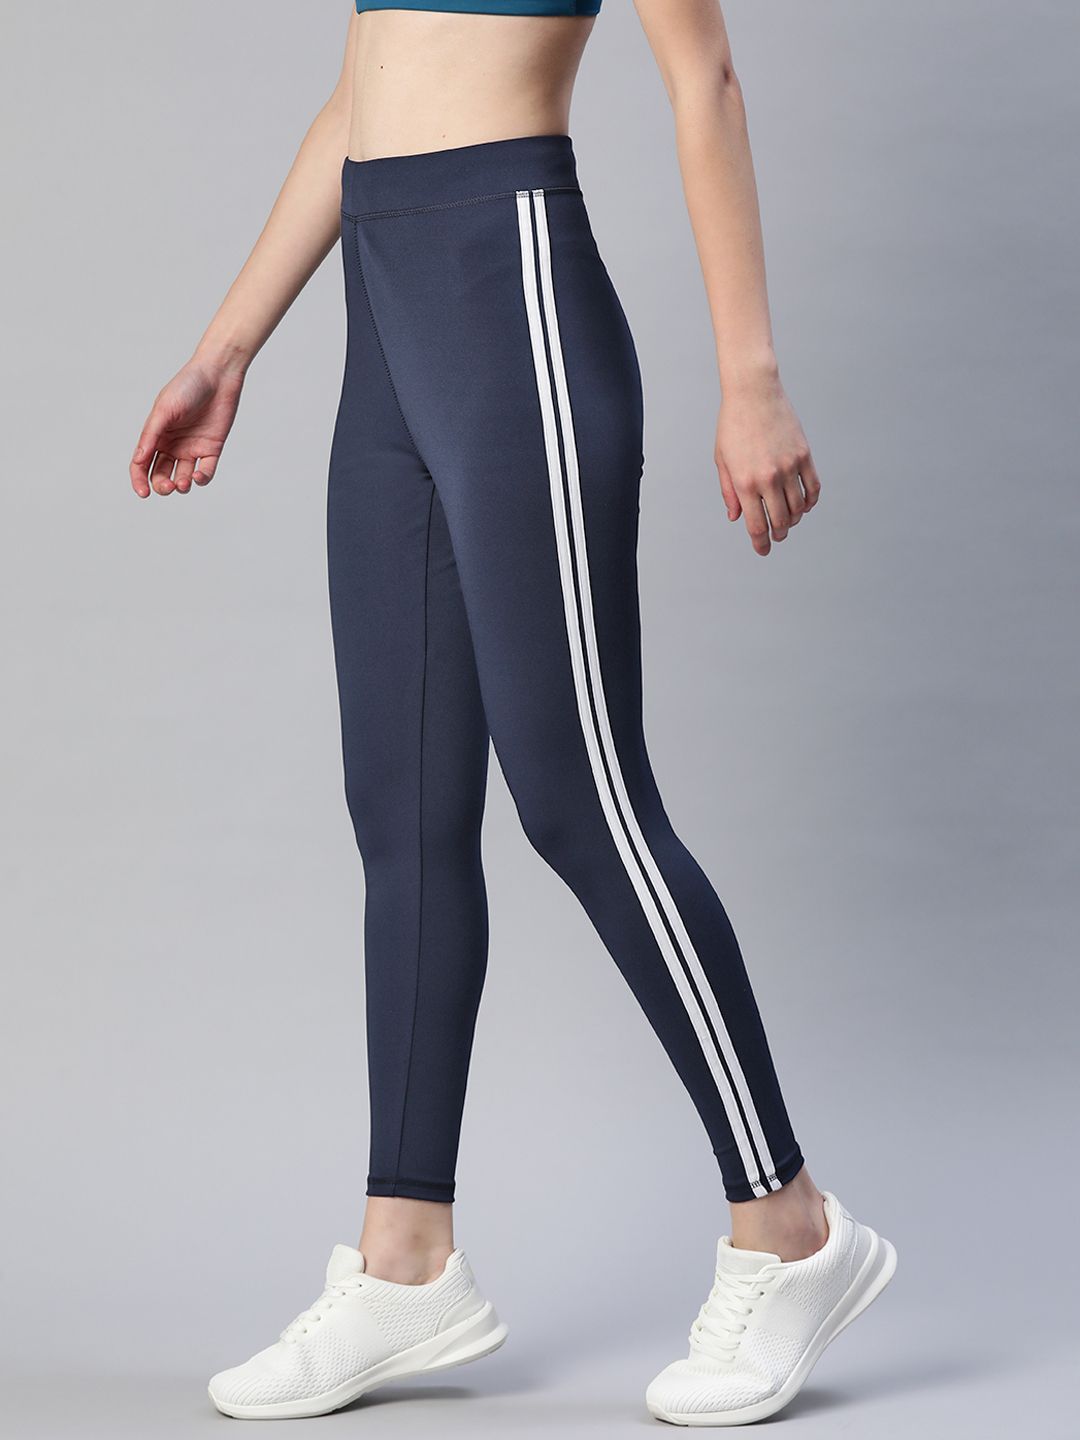 Blinkin Women Navy Blue Rapid Dry Tights With Side Stripes Price in India